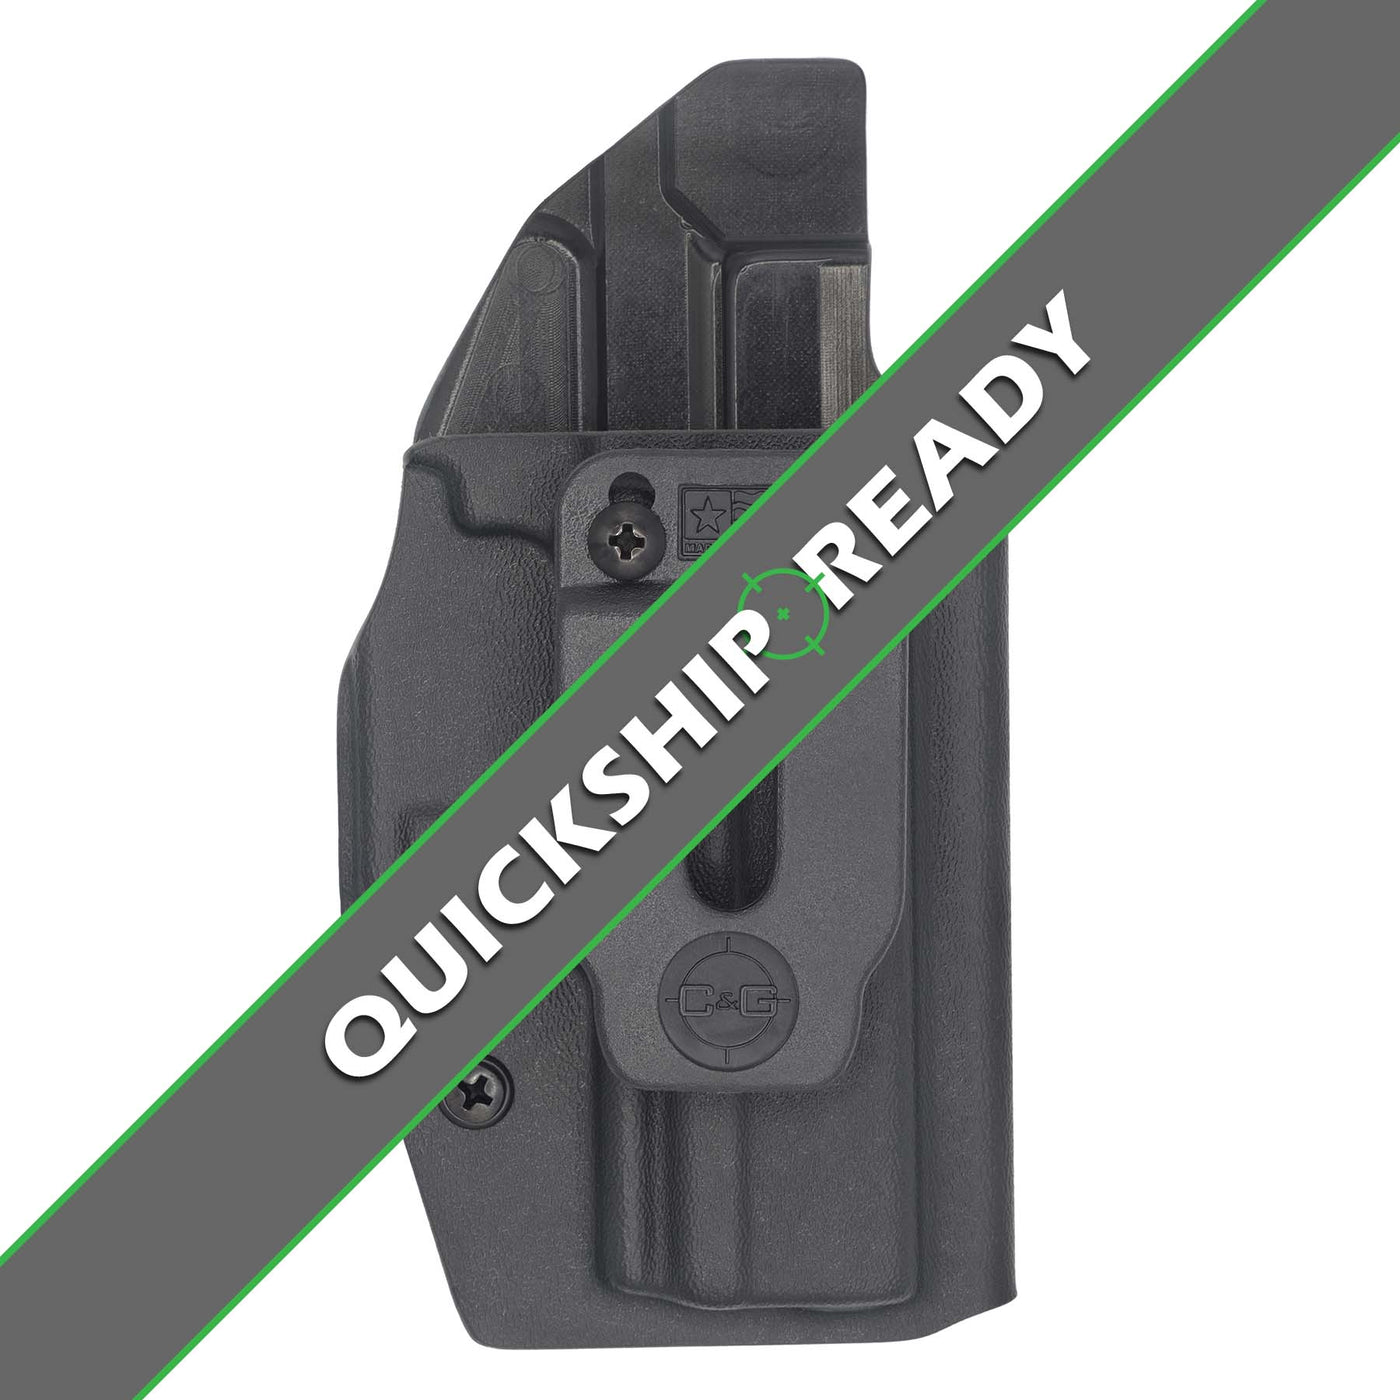 Quickship C&G Holsters IWB inside the waistband Holster for the Walther PK380